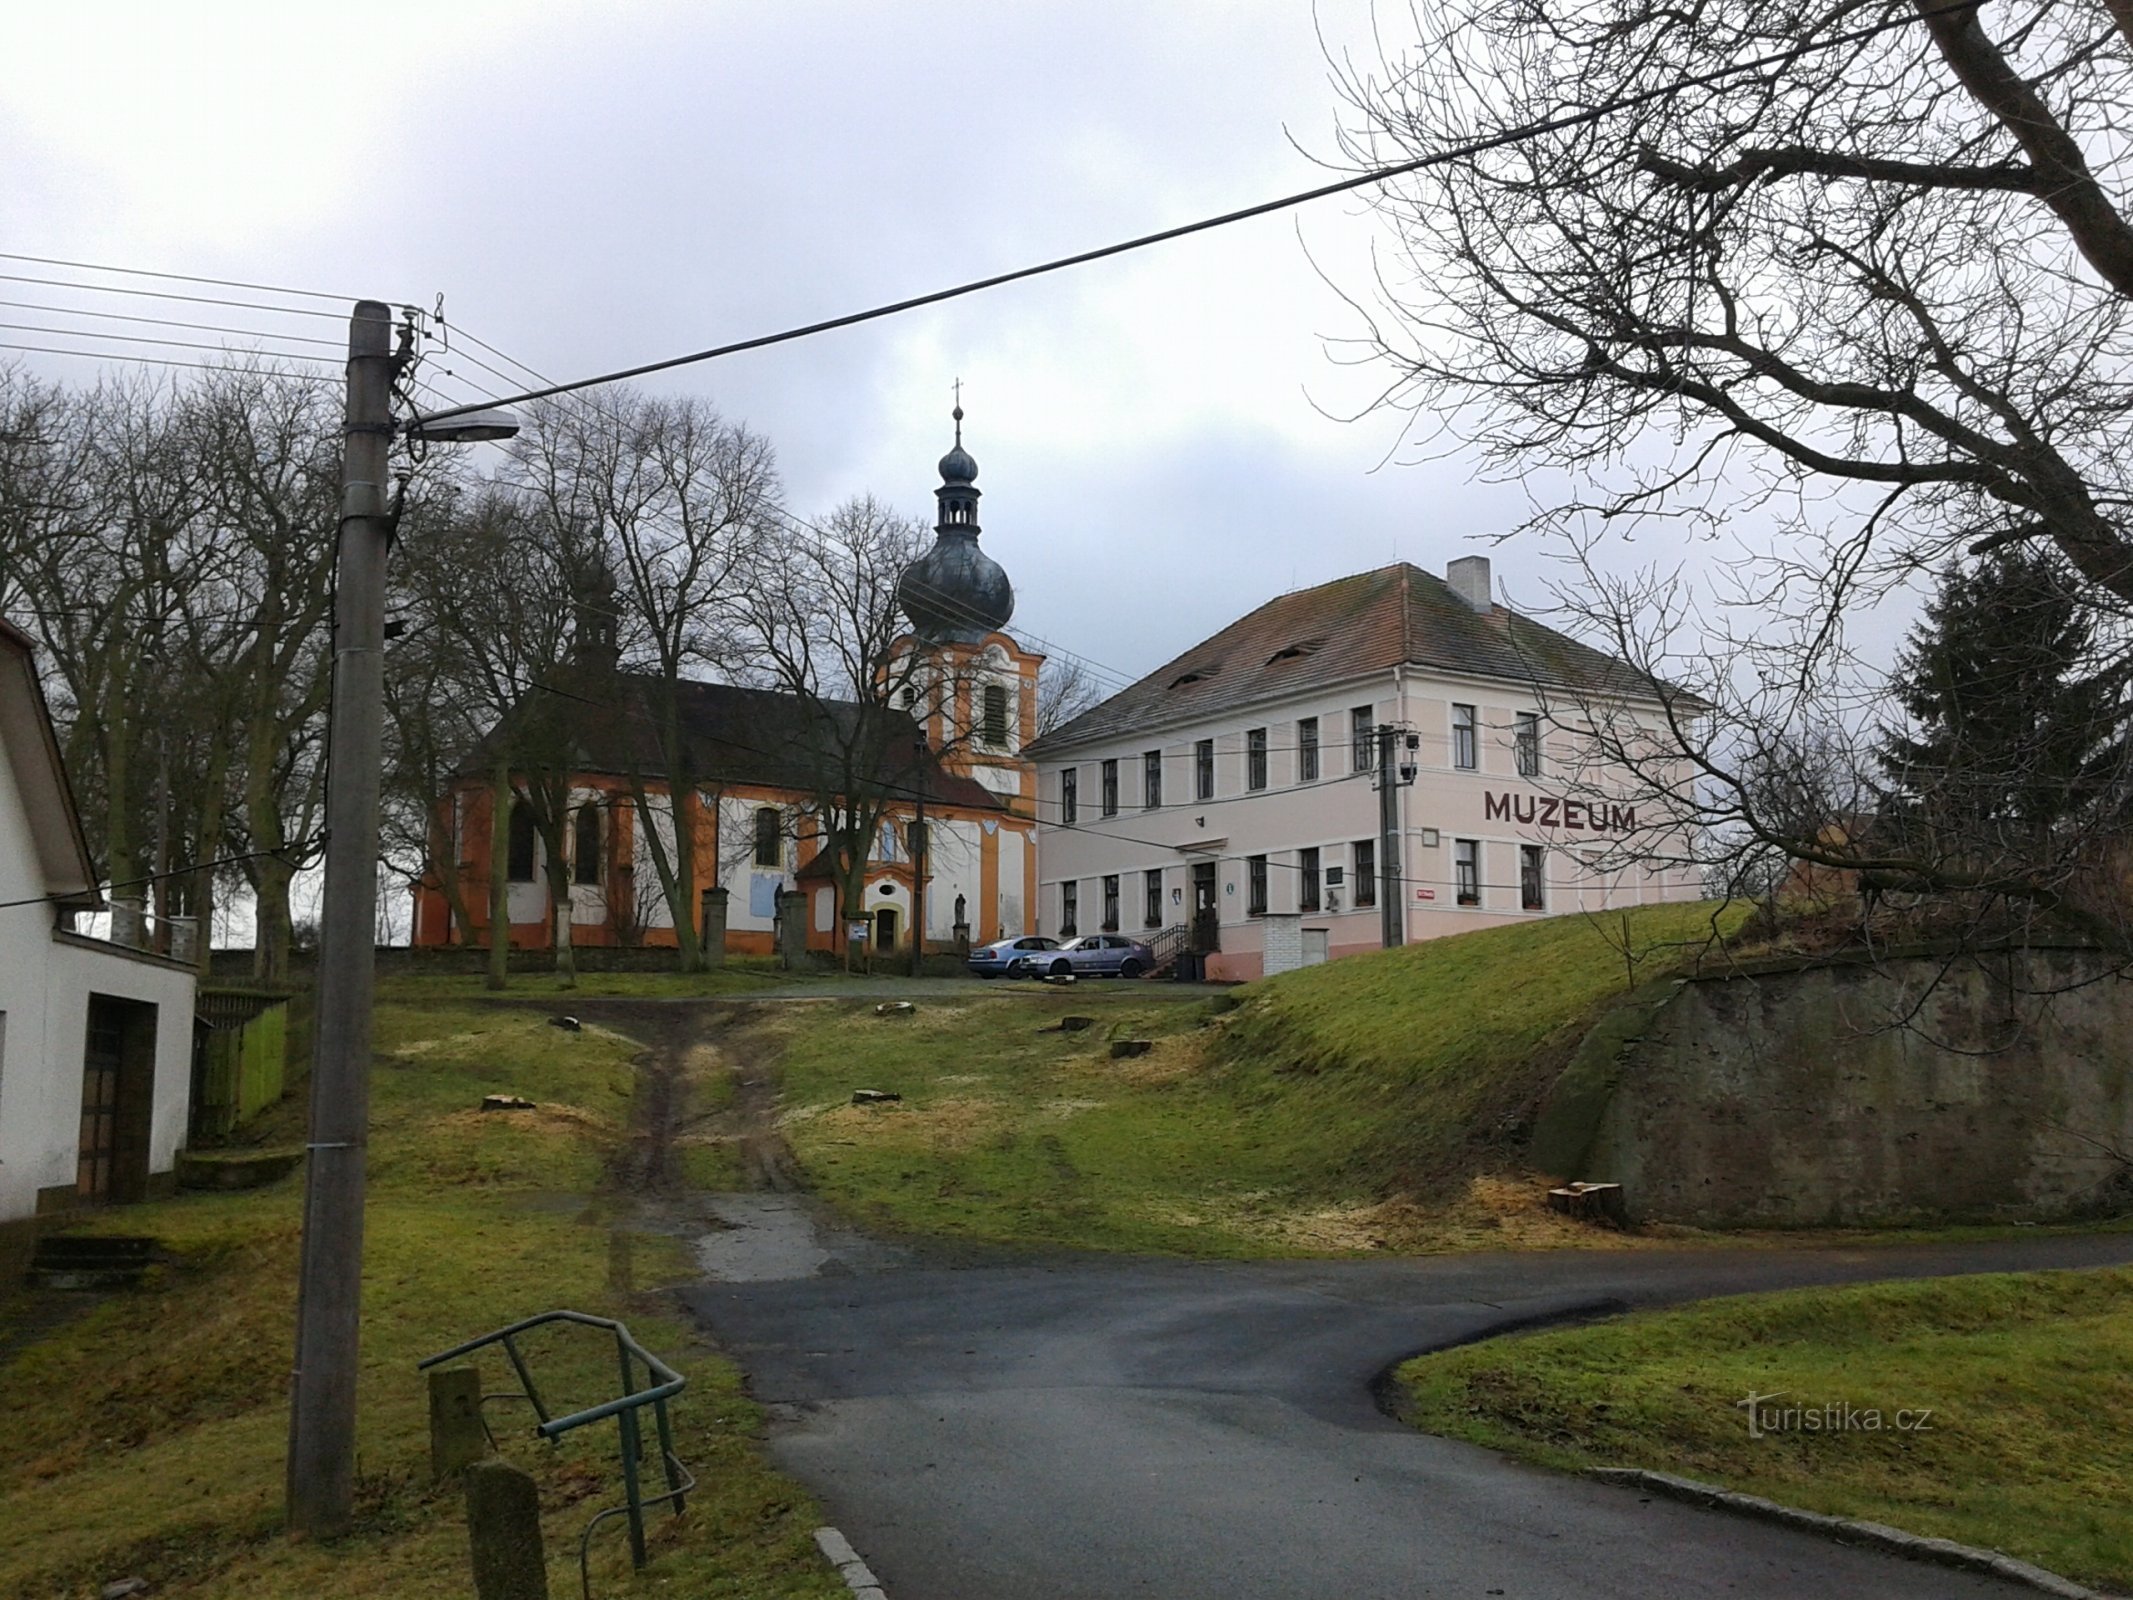 The museum in the old school and the church of St. Lawrence